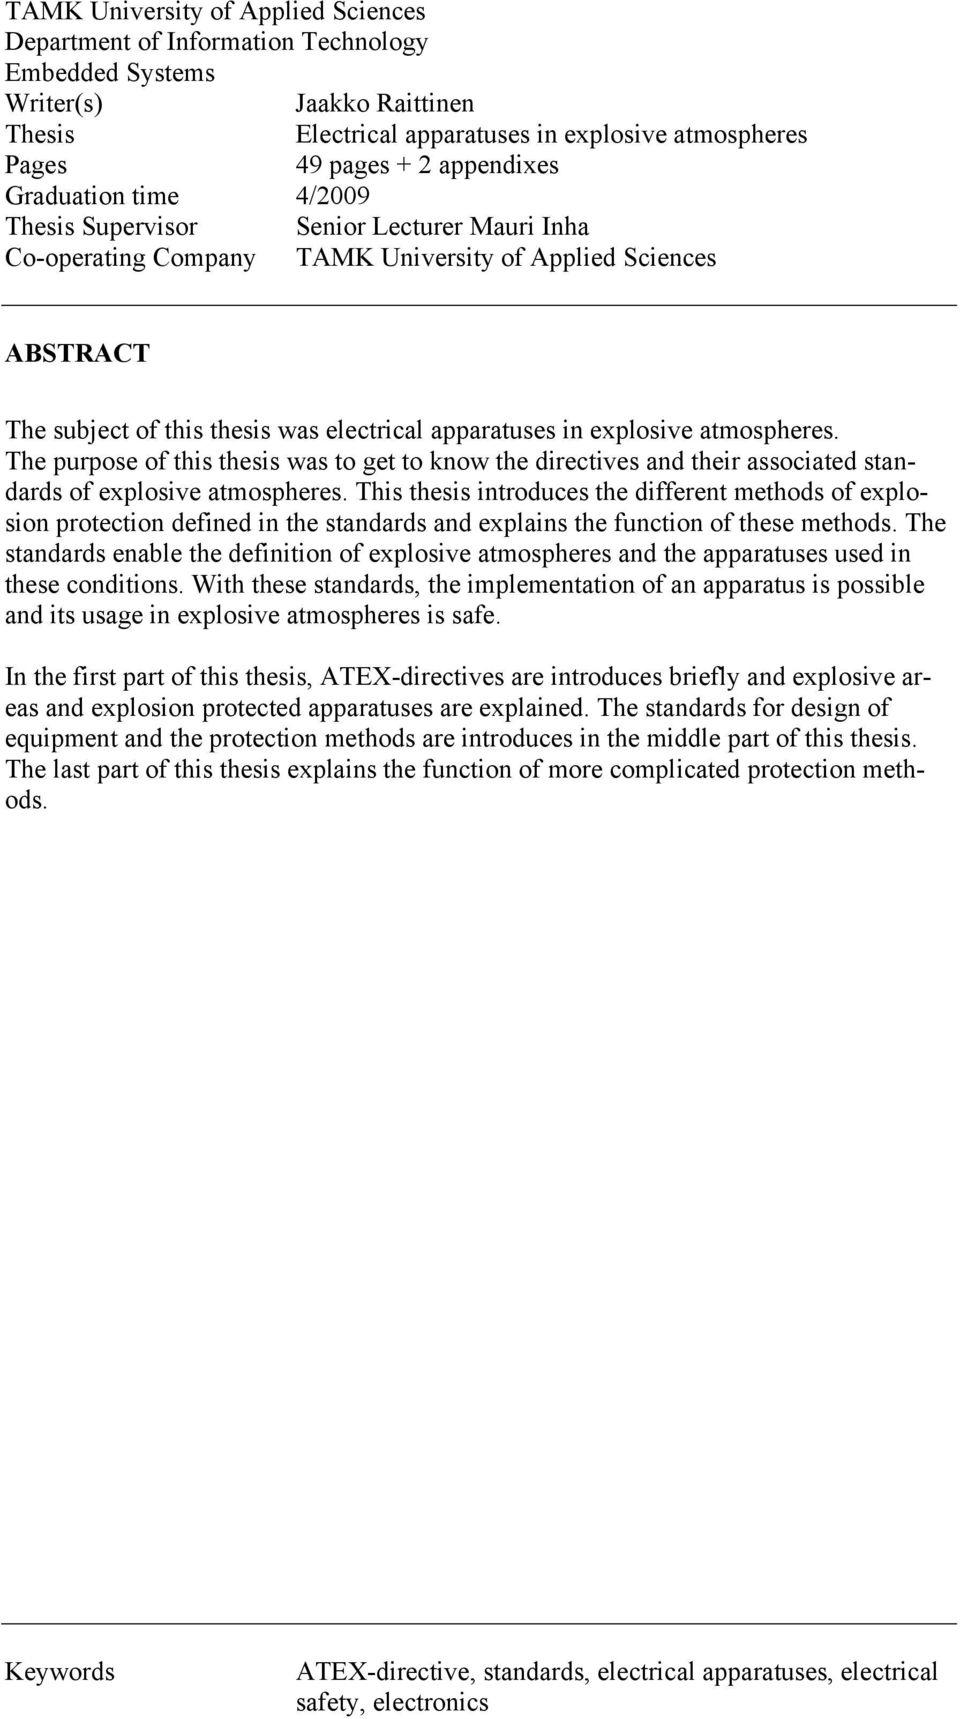 in explosive atmospheres. The purpose of this thesis was to get to know the directives and their associated standards of explosive atmospheres.